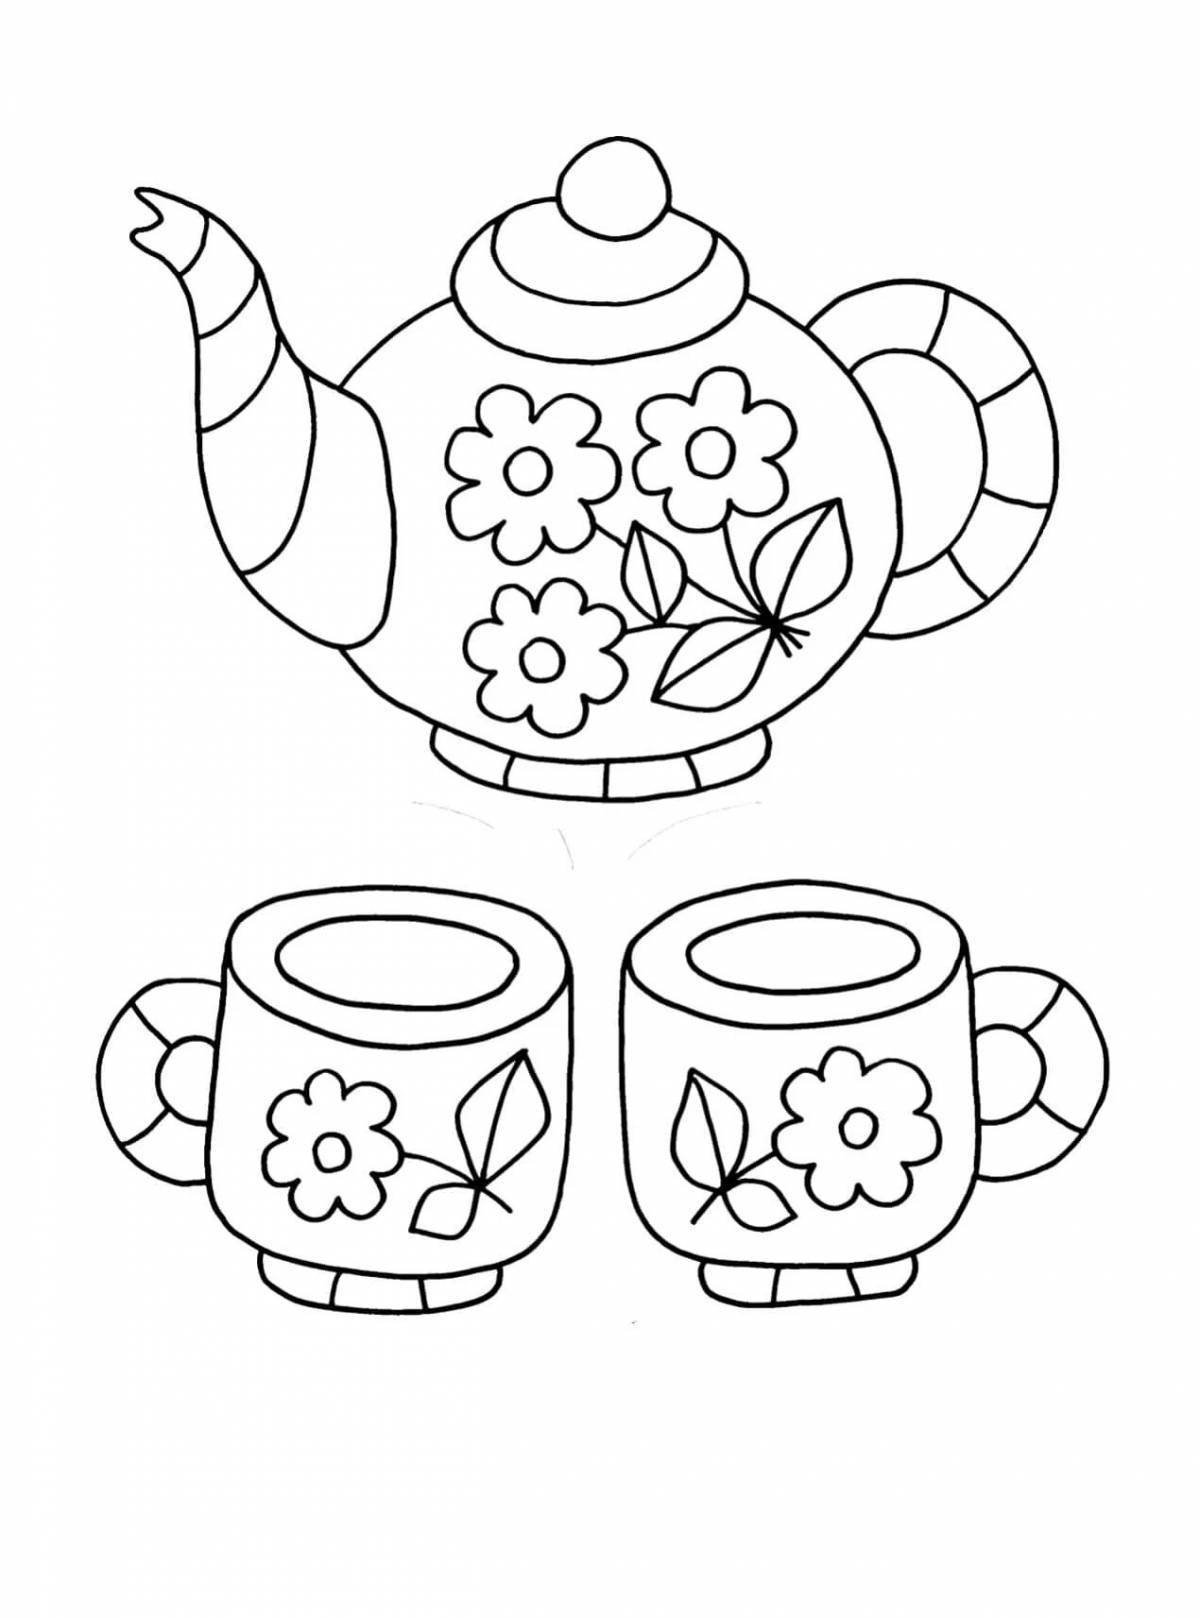 Exciting crockery junior group coloring page